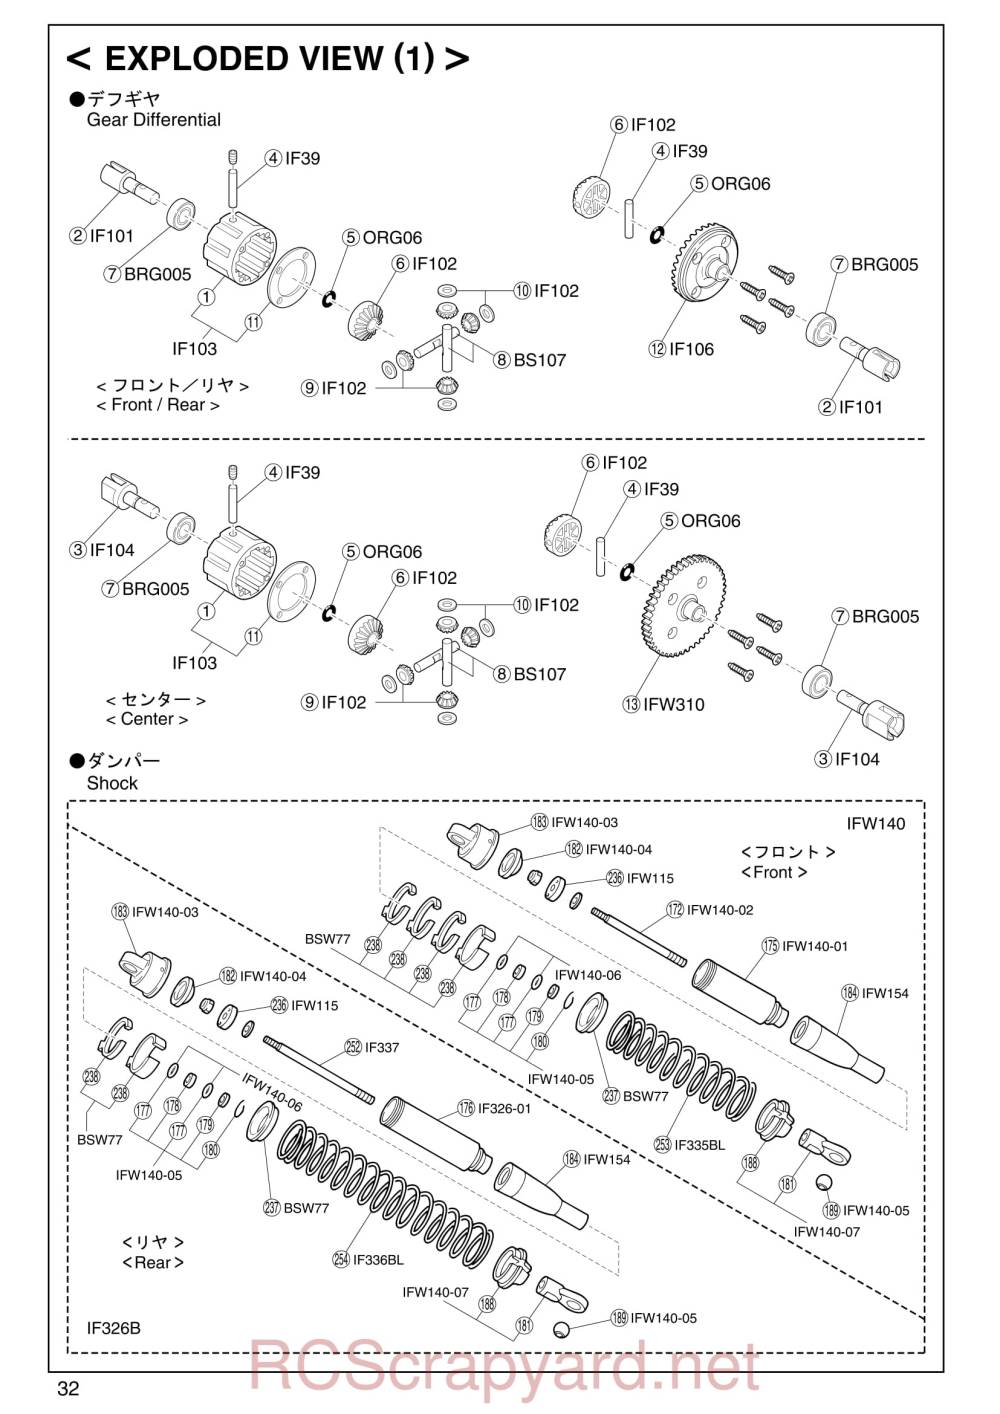 Kyosho Inferno MP-777 SP2 - 31779 - Exploded View - Page 2